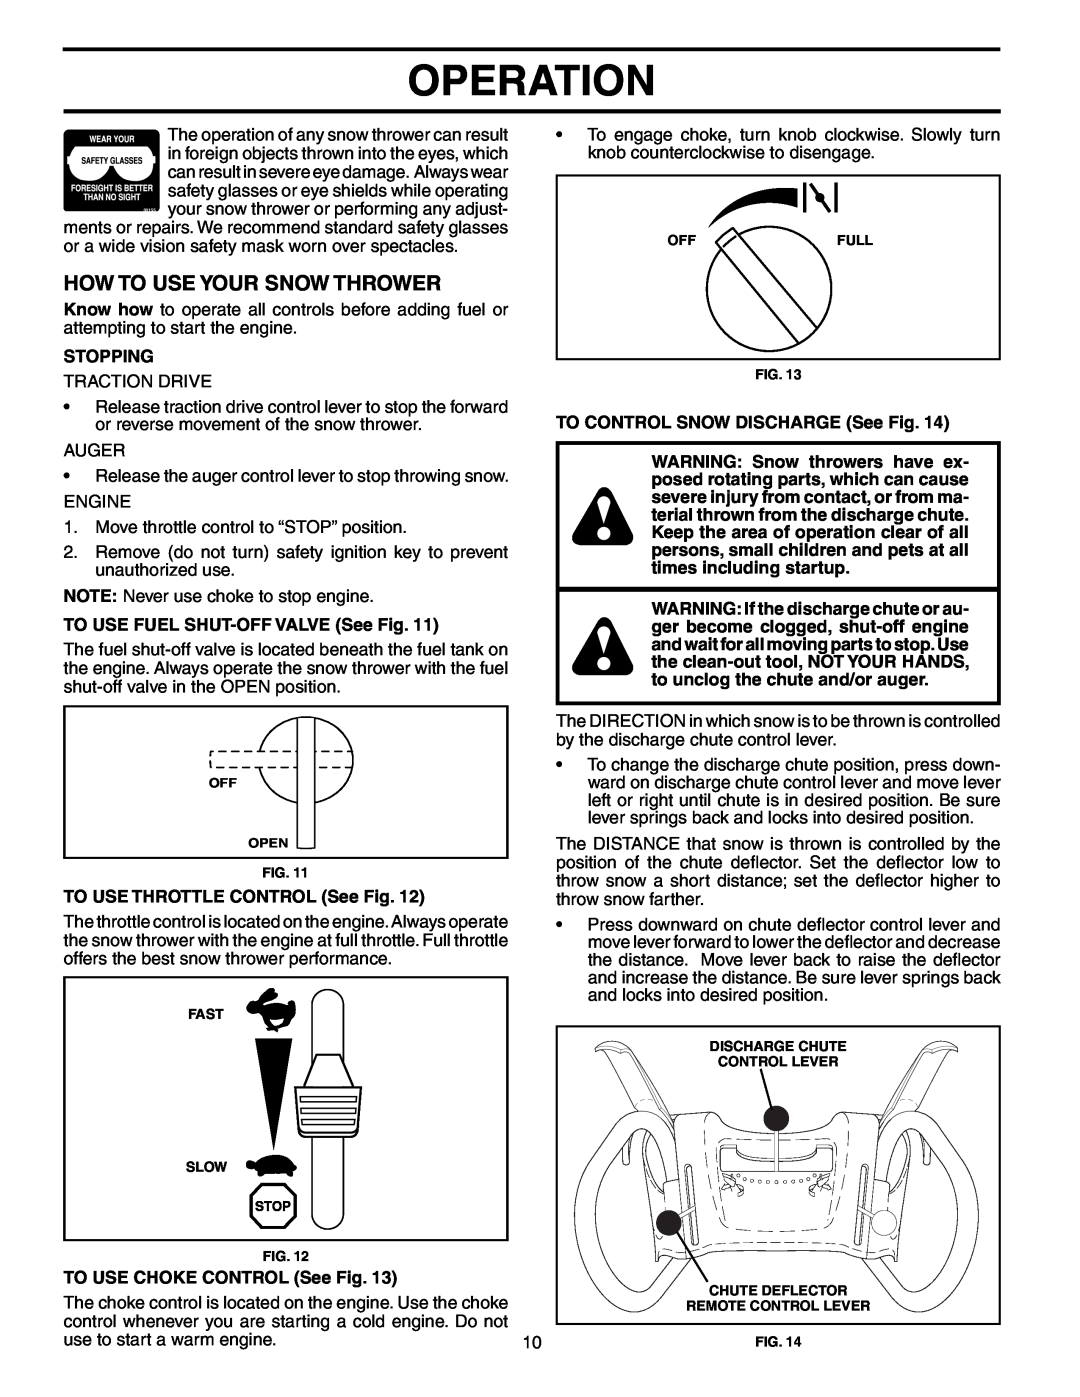 Poulan PO10527ESA owner manual How To Use Your Snow Thrower, Operation, Stopping, TO USE FUEL SHUT-OFFVALVE See Fig 